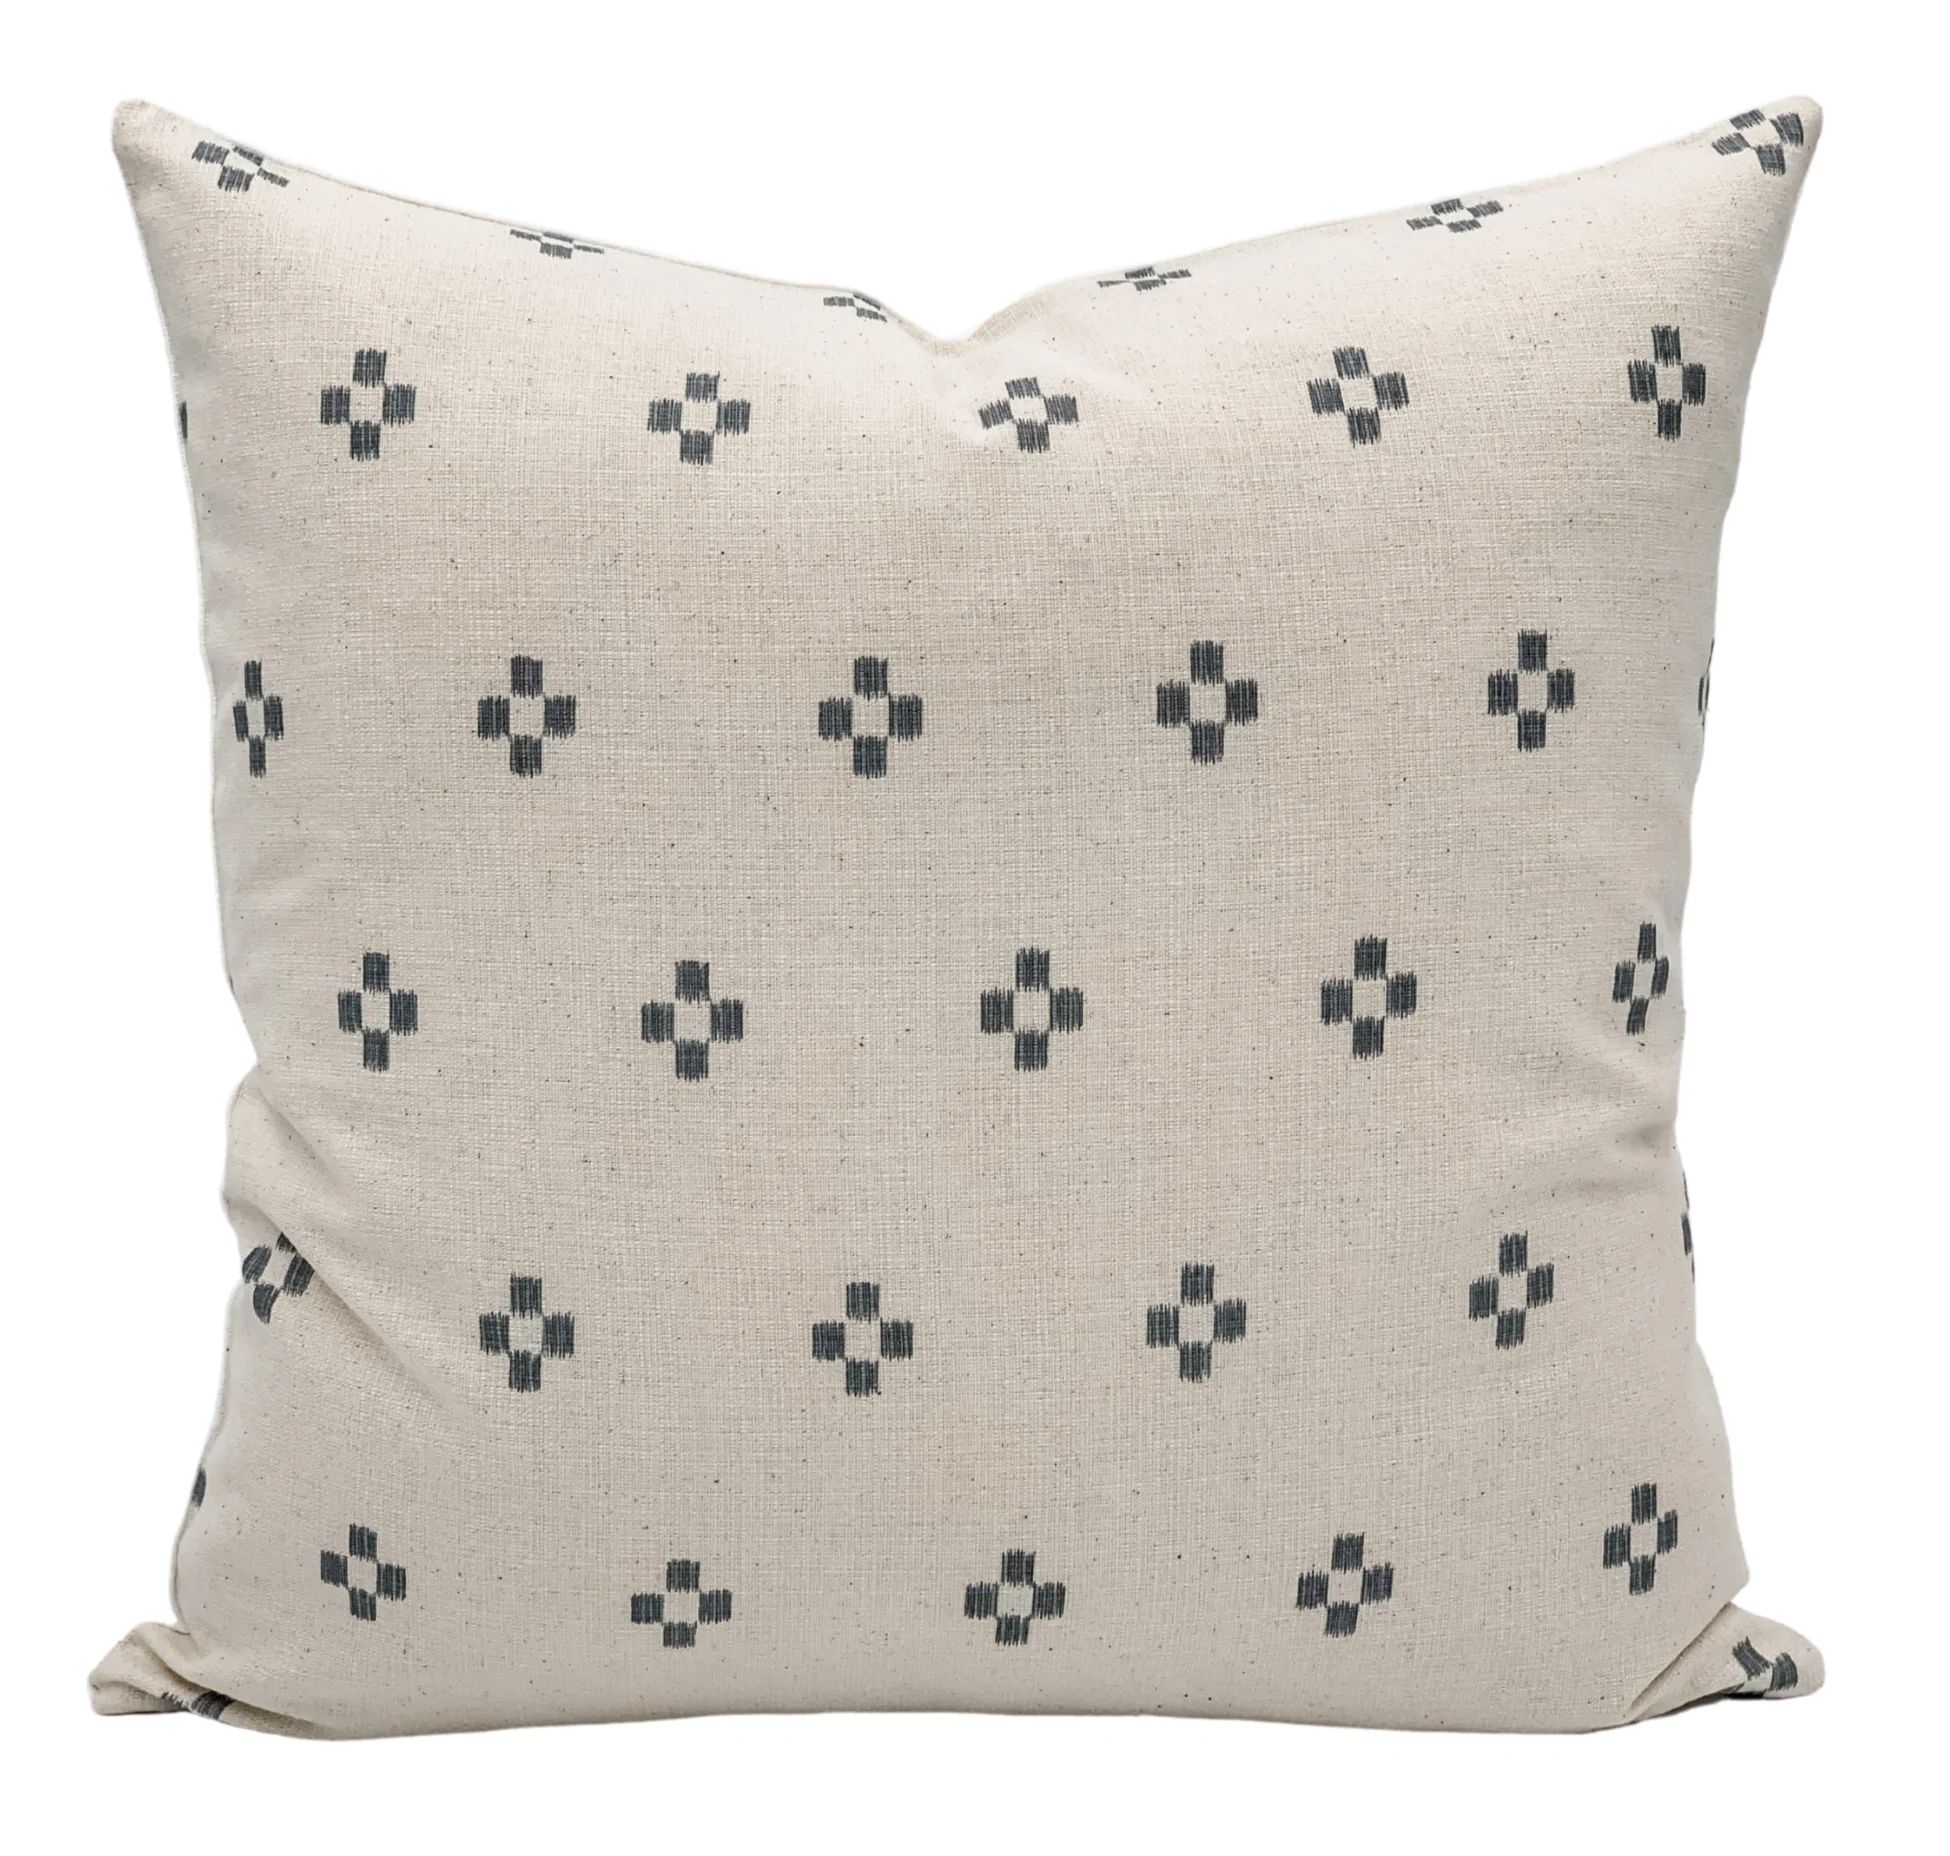 White and Blue grey Dot Hmong Pillow Cover | Krinto